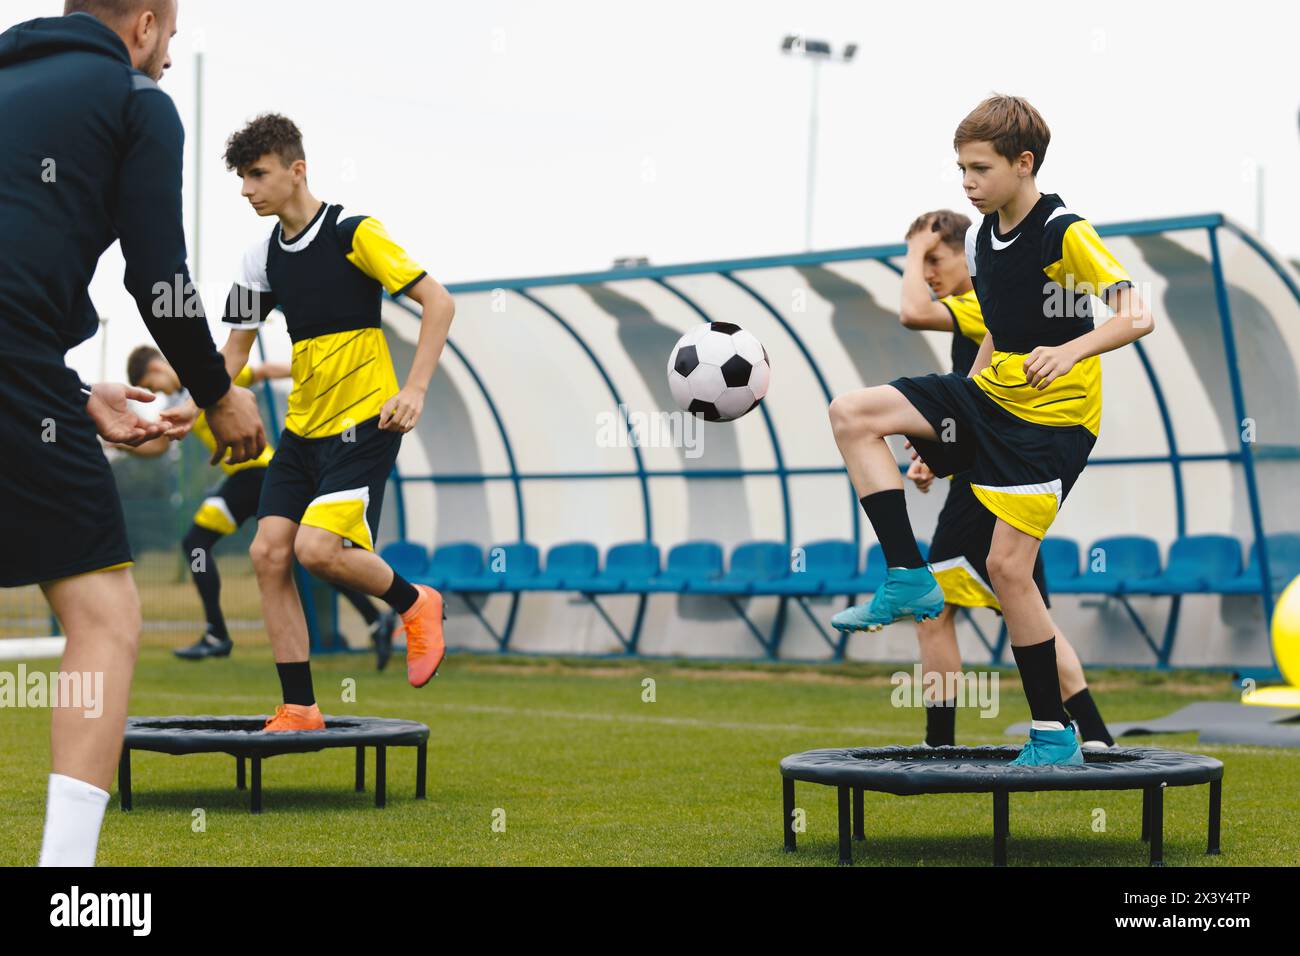 Group of young boys in sports soccer club practicing on jumping trampoline. Teenagers on football training trampoline. Youth athletes improving stabil Stock Photo